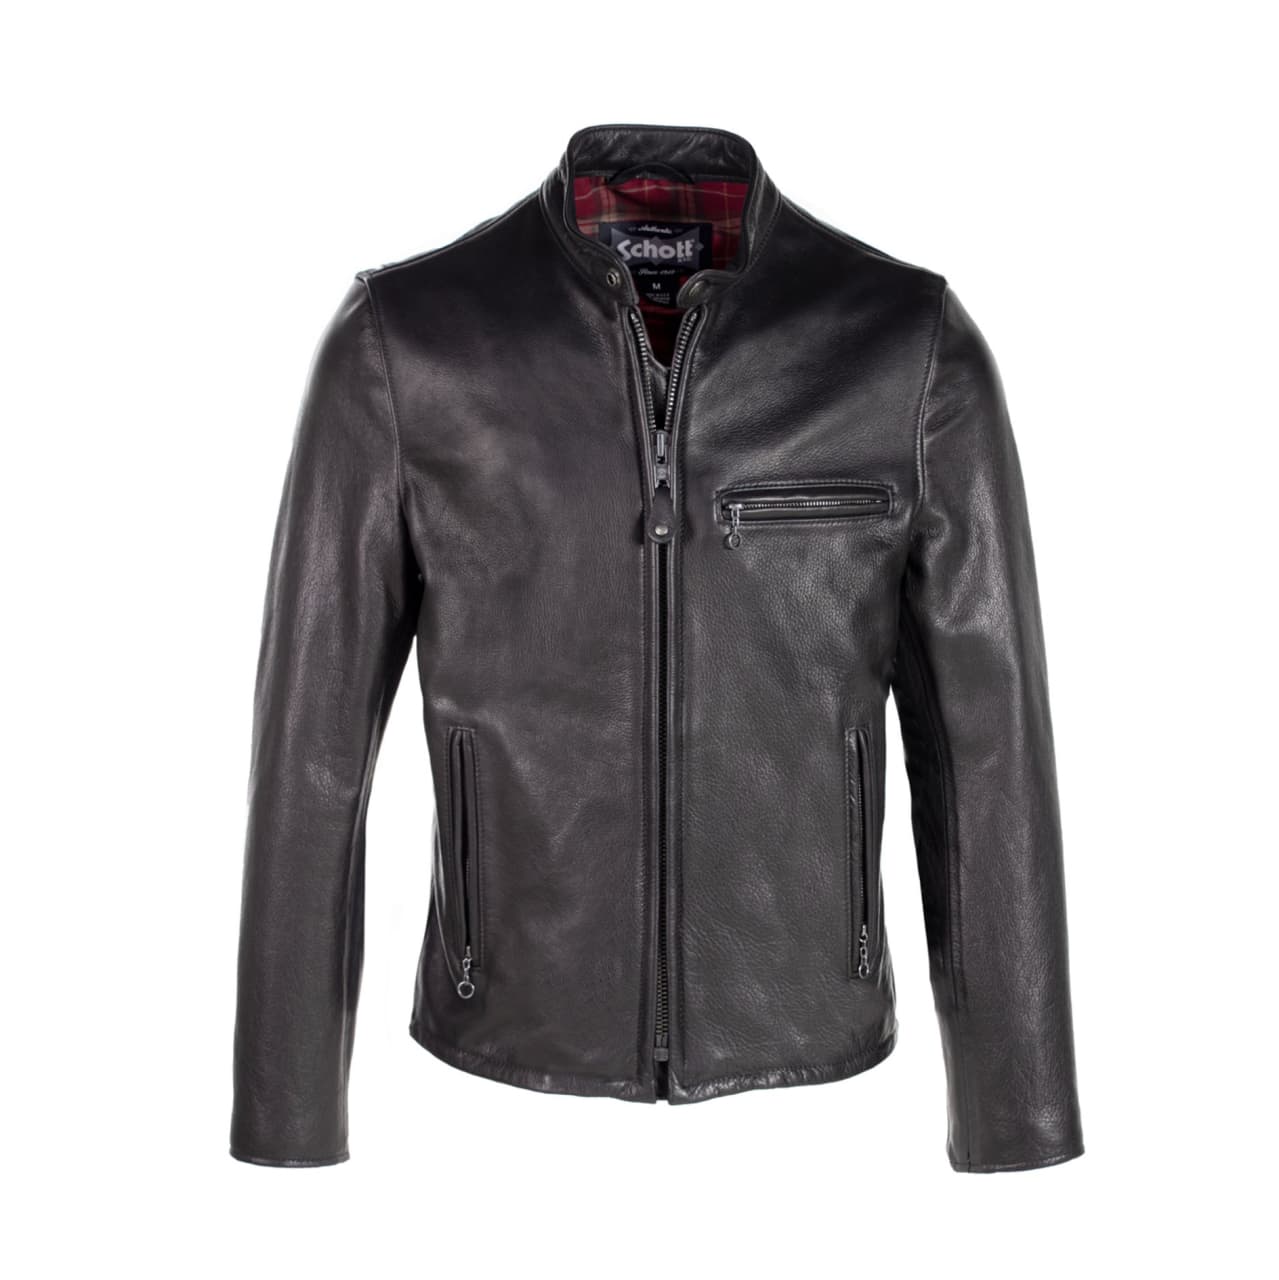 The 530 Leather Jacket